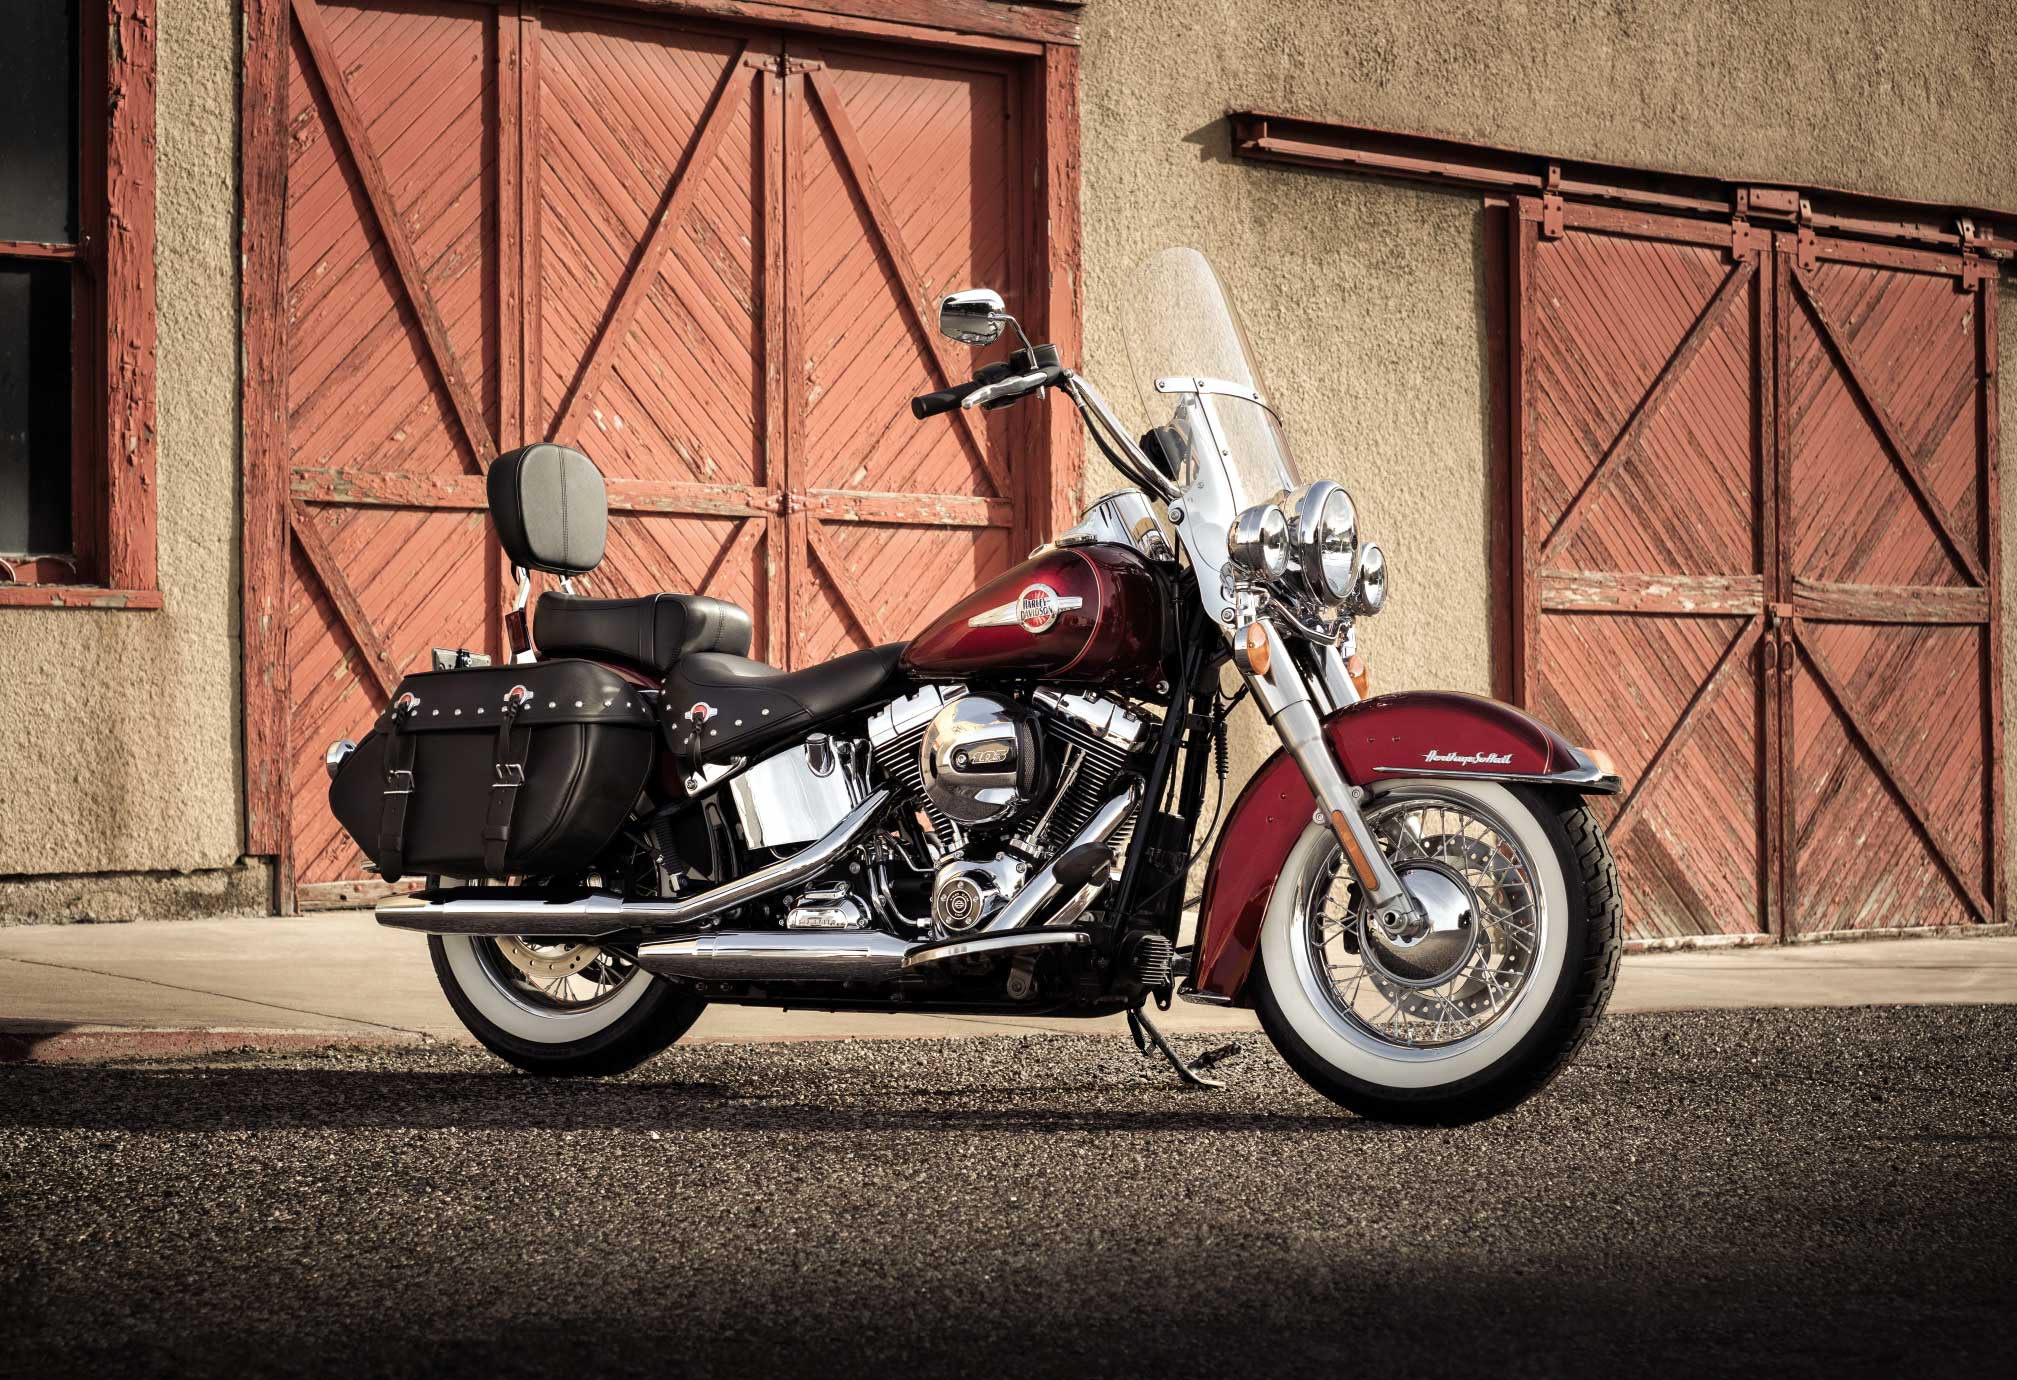 2017 Harley Davidson Heritage Softail Classic Review